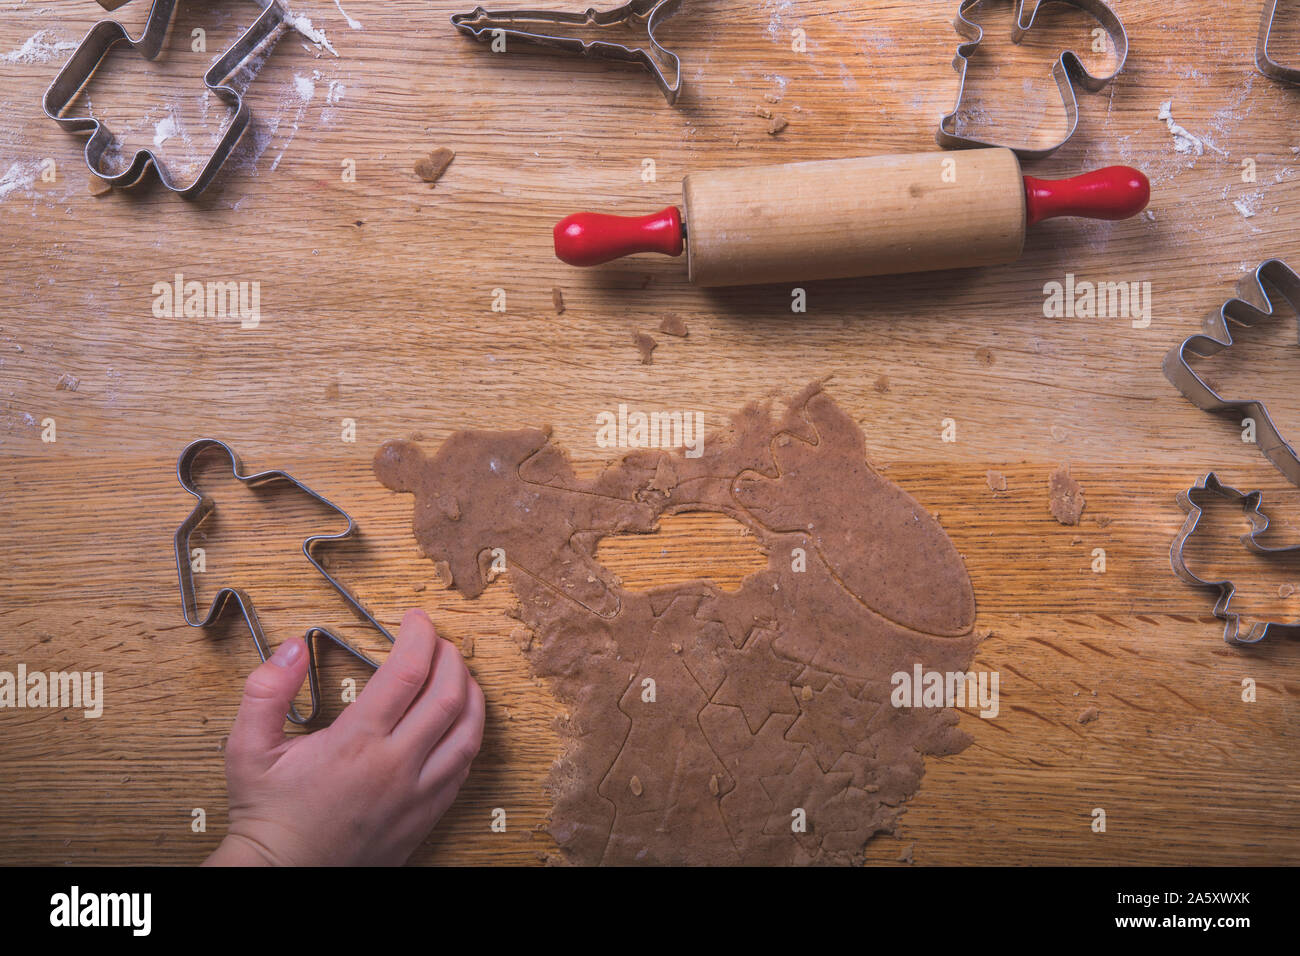 Gingerbread baking on a wooden table, with a kids hand grabbing one of the cookie cutters.  There are cookies cutters in various shapes on the table, Stock Photo